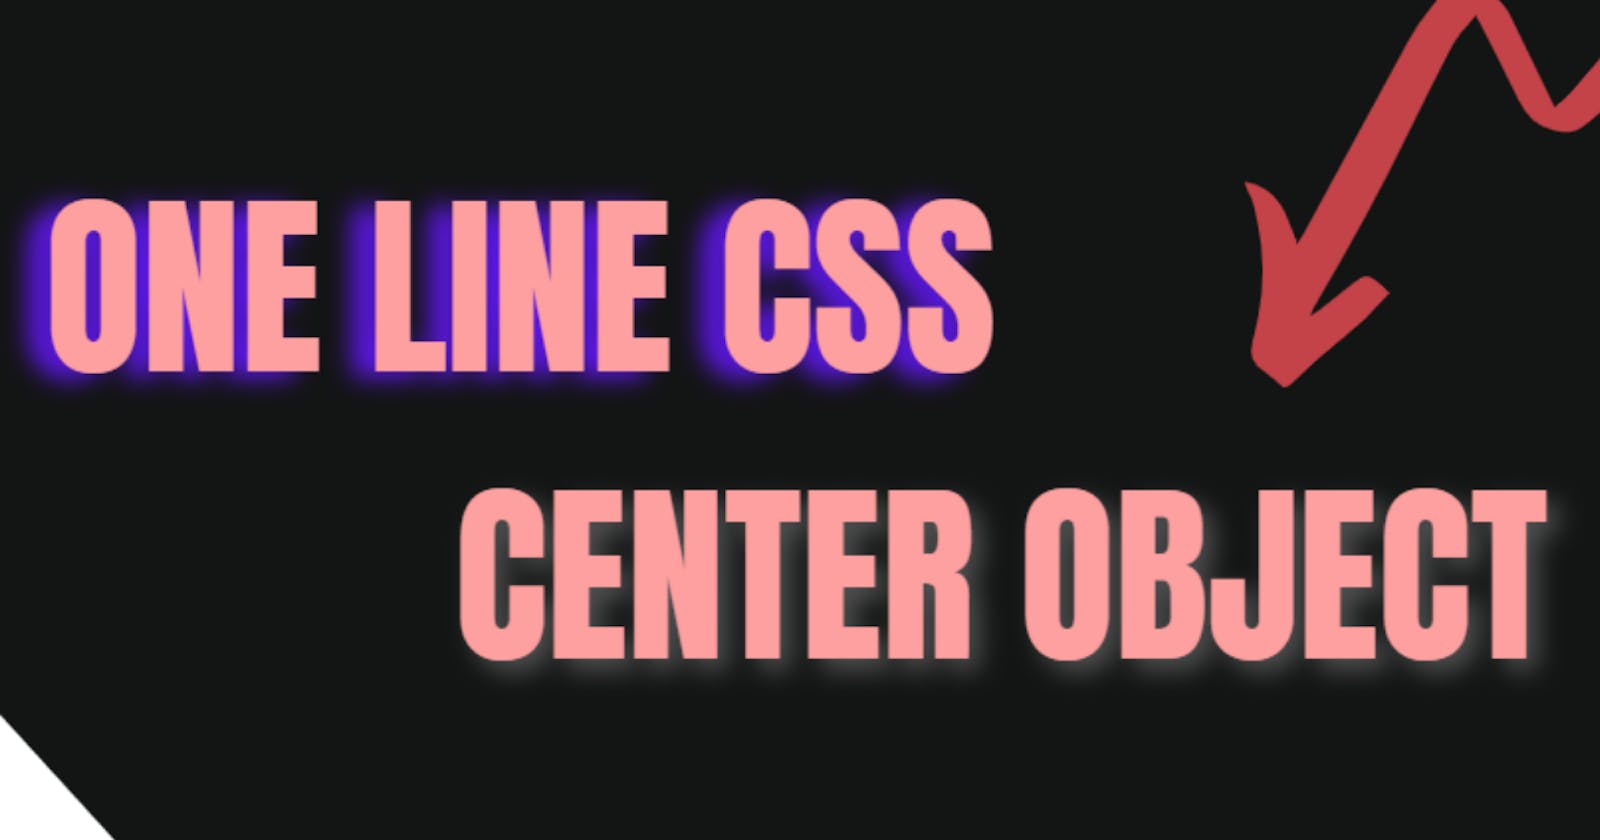 This one line CSS can center object easily : Putting end to your Google search